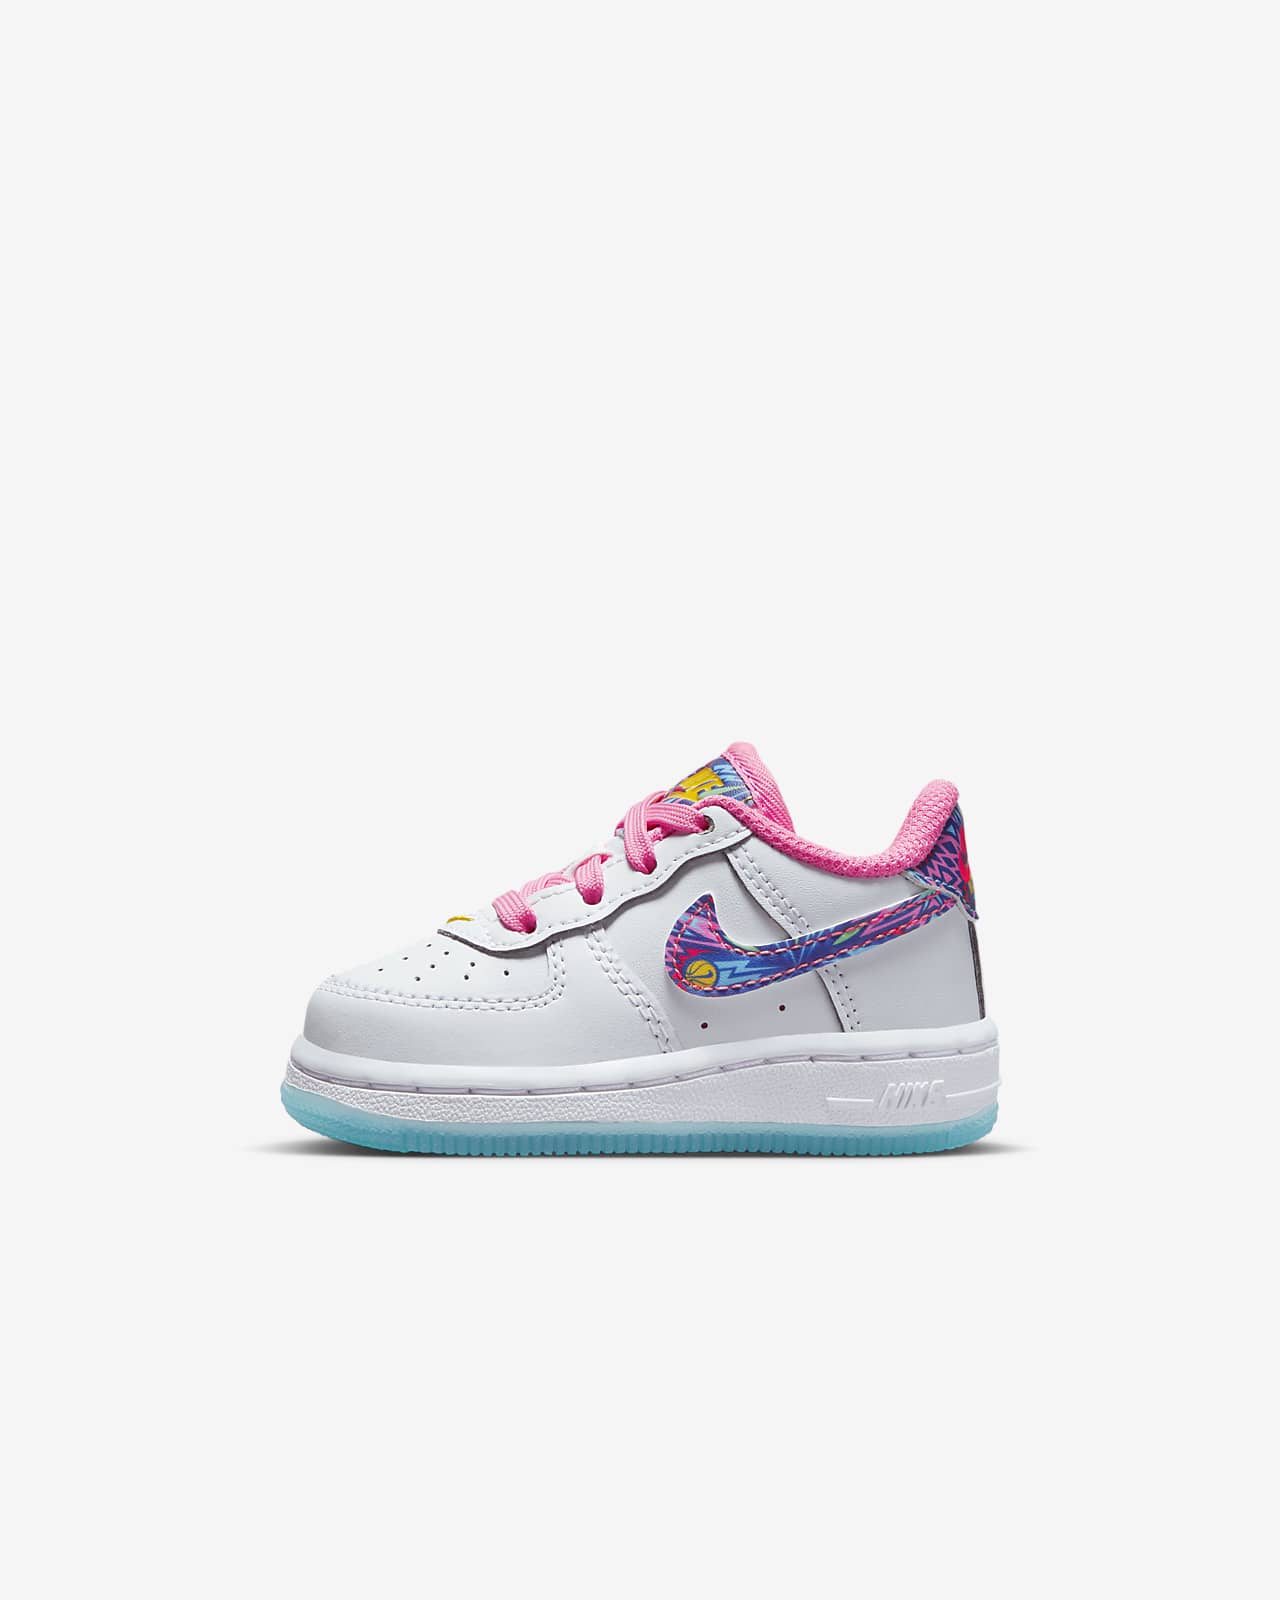 Nike 1 Low ASW Baby/Toddler Shoes.